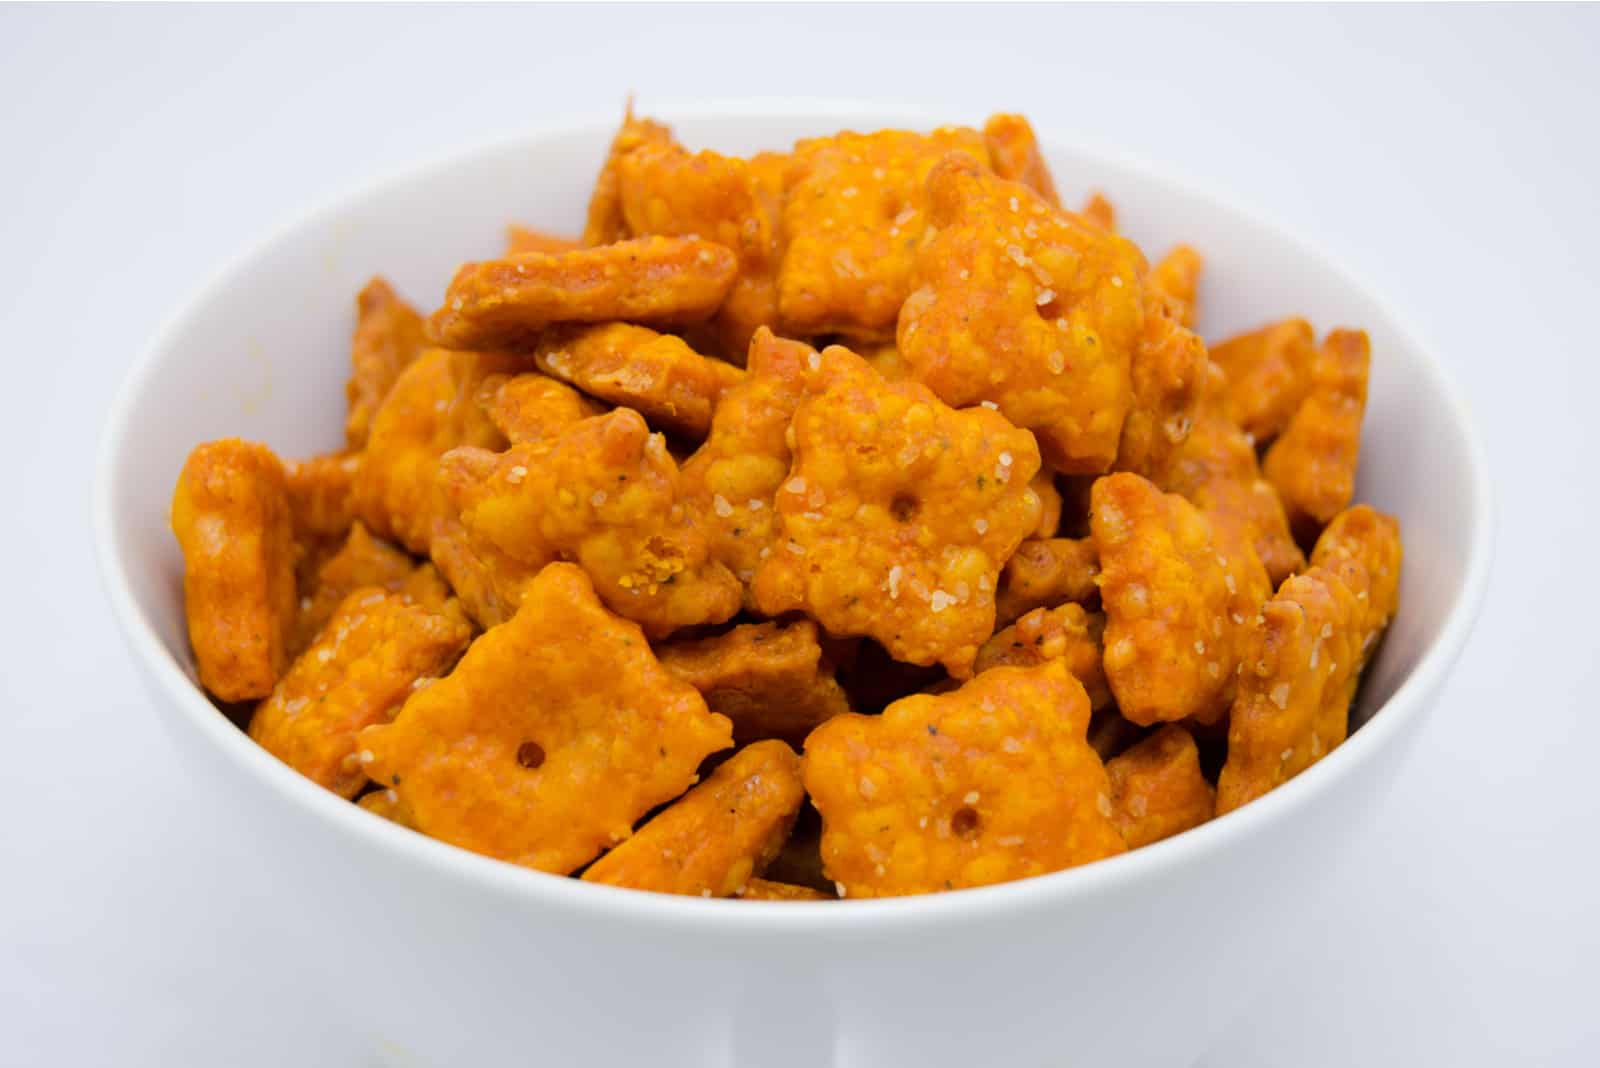 Cheez-Its snacks in a white bowl